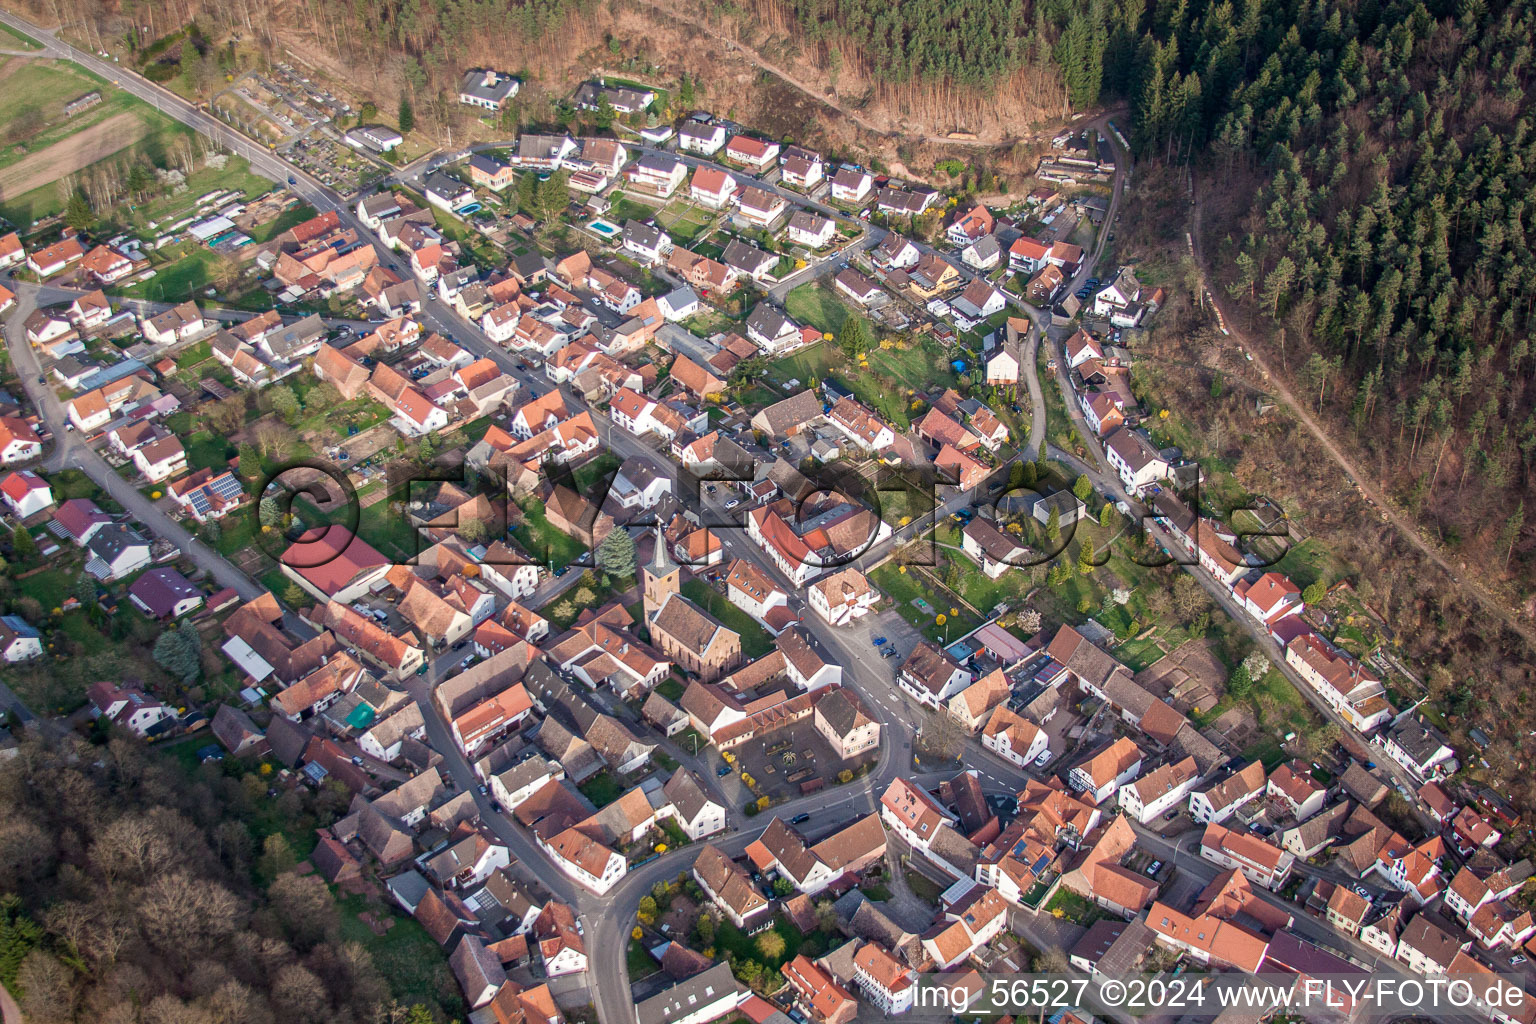 Aerial view of Village view in Vorderweidenthal in the state Rhineland-Palatinate, Germany